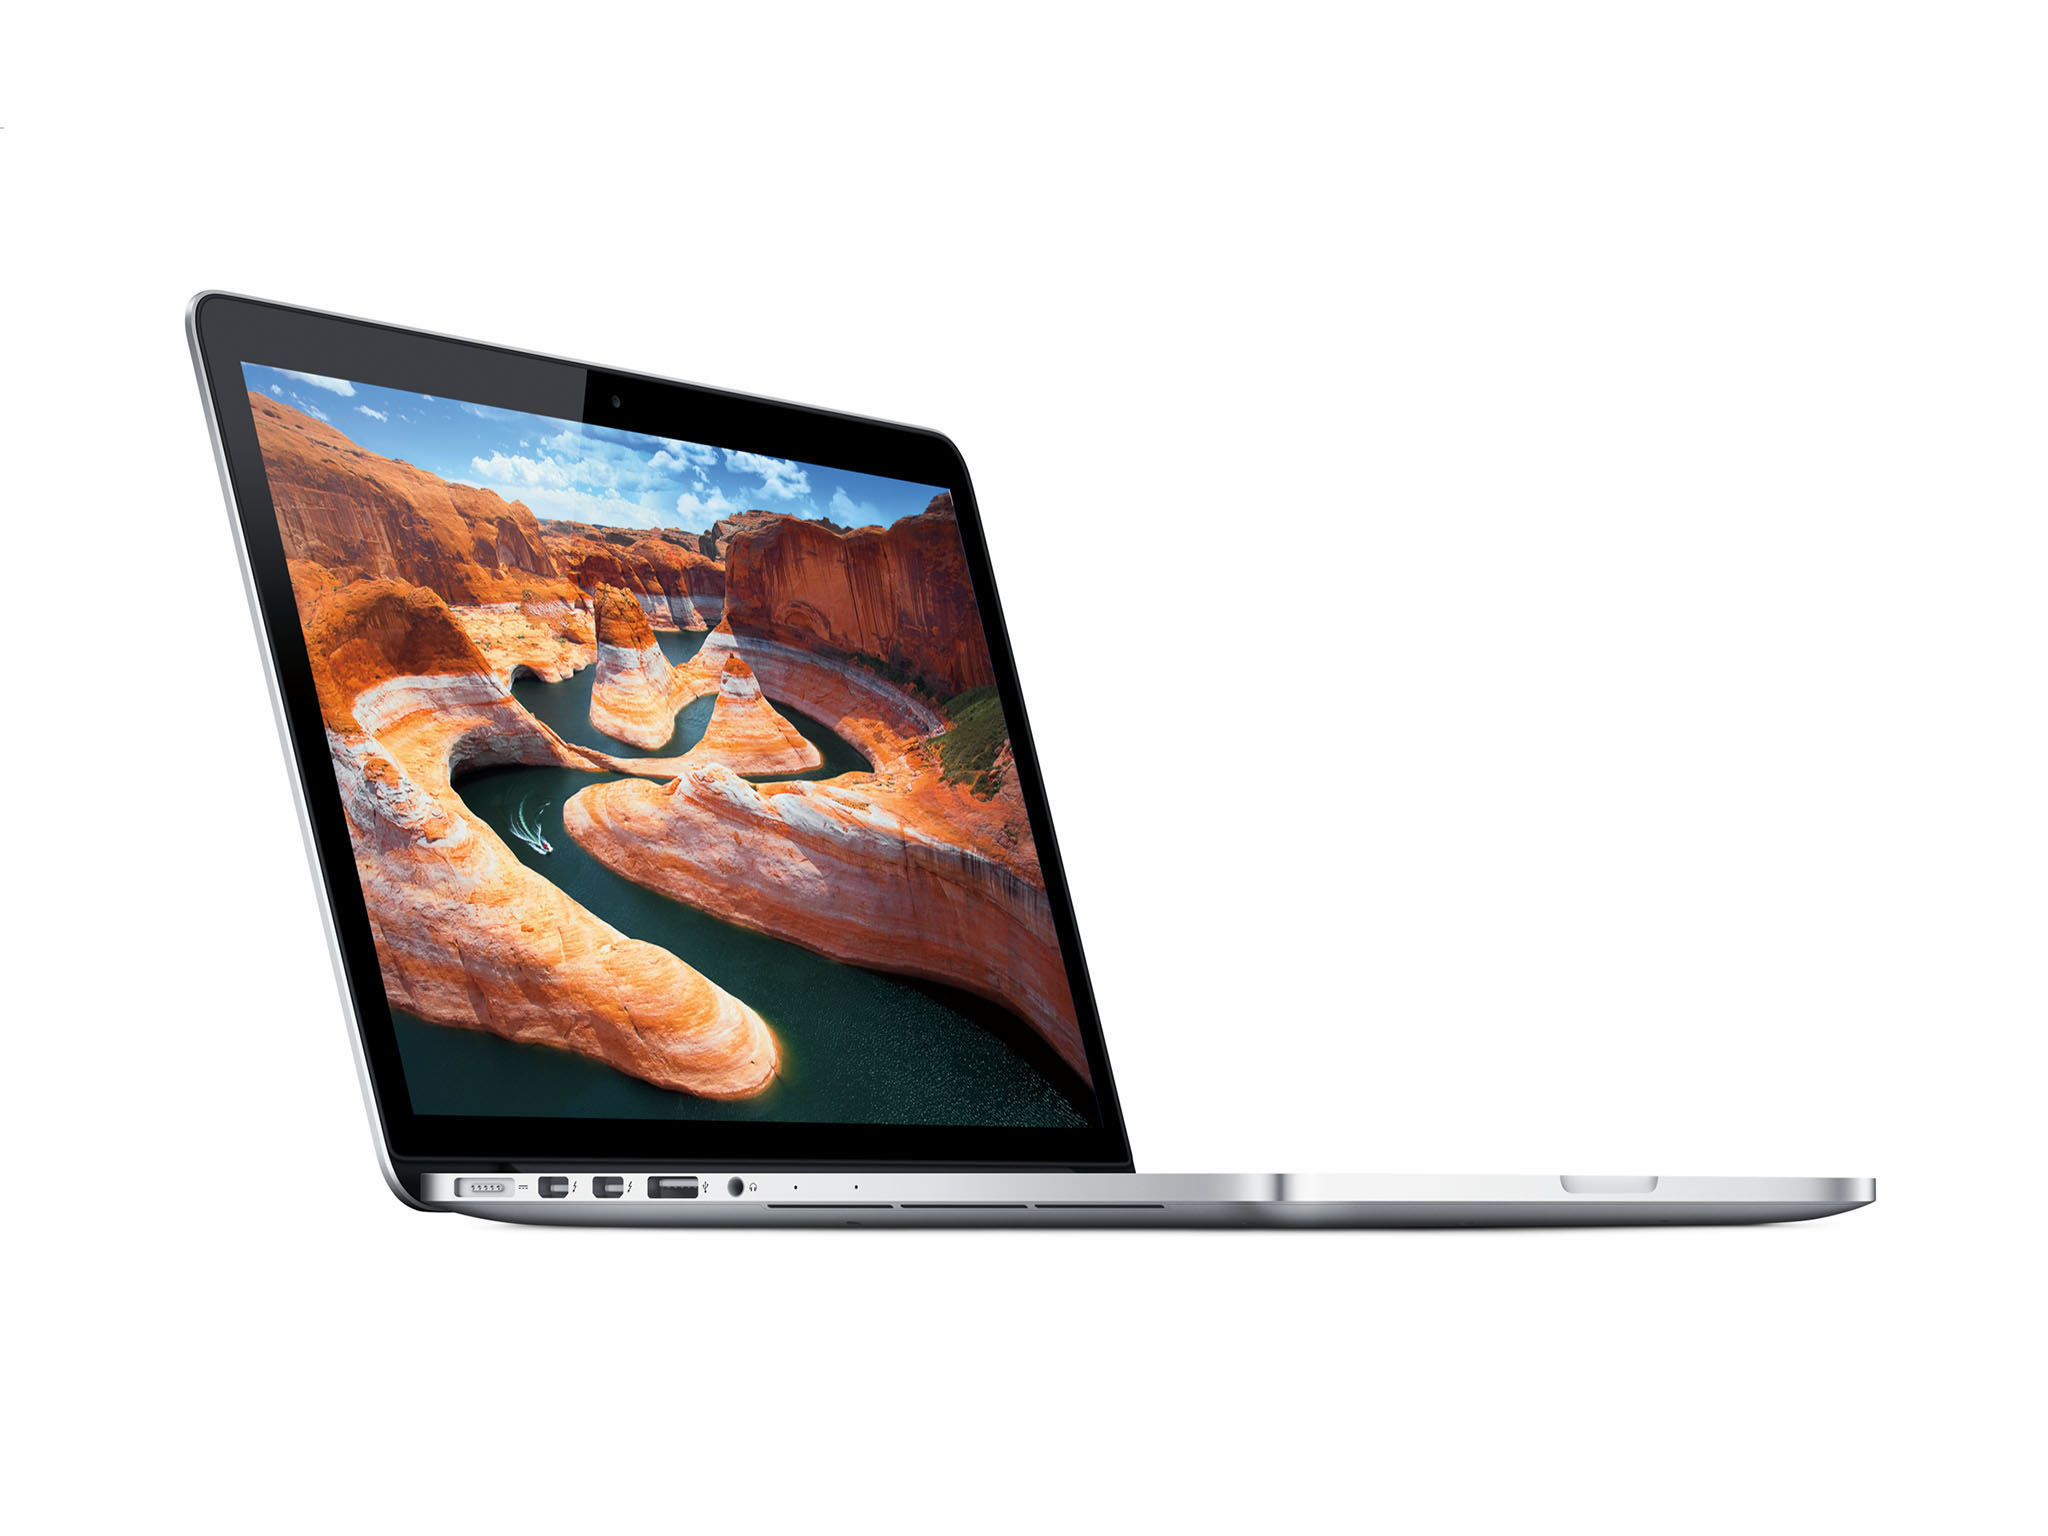 Apple posts two EFI updates for late 2013 MacBook Pros with Retina Displays